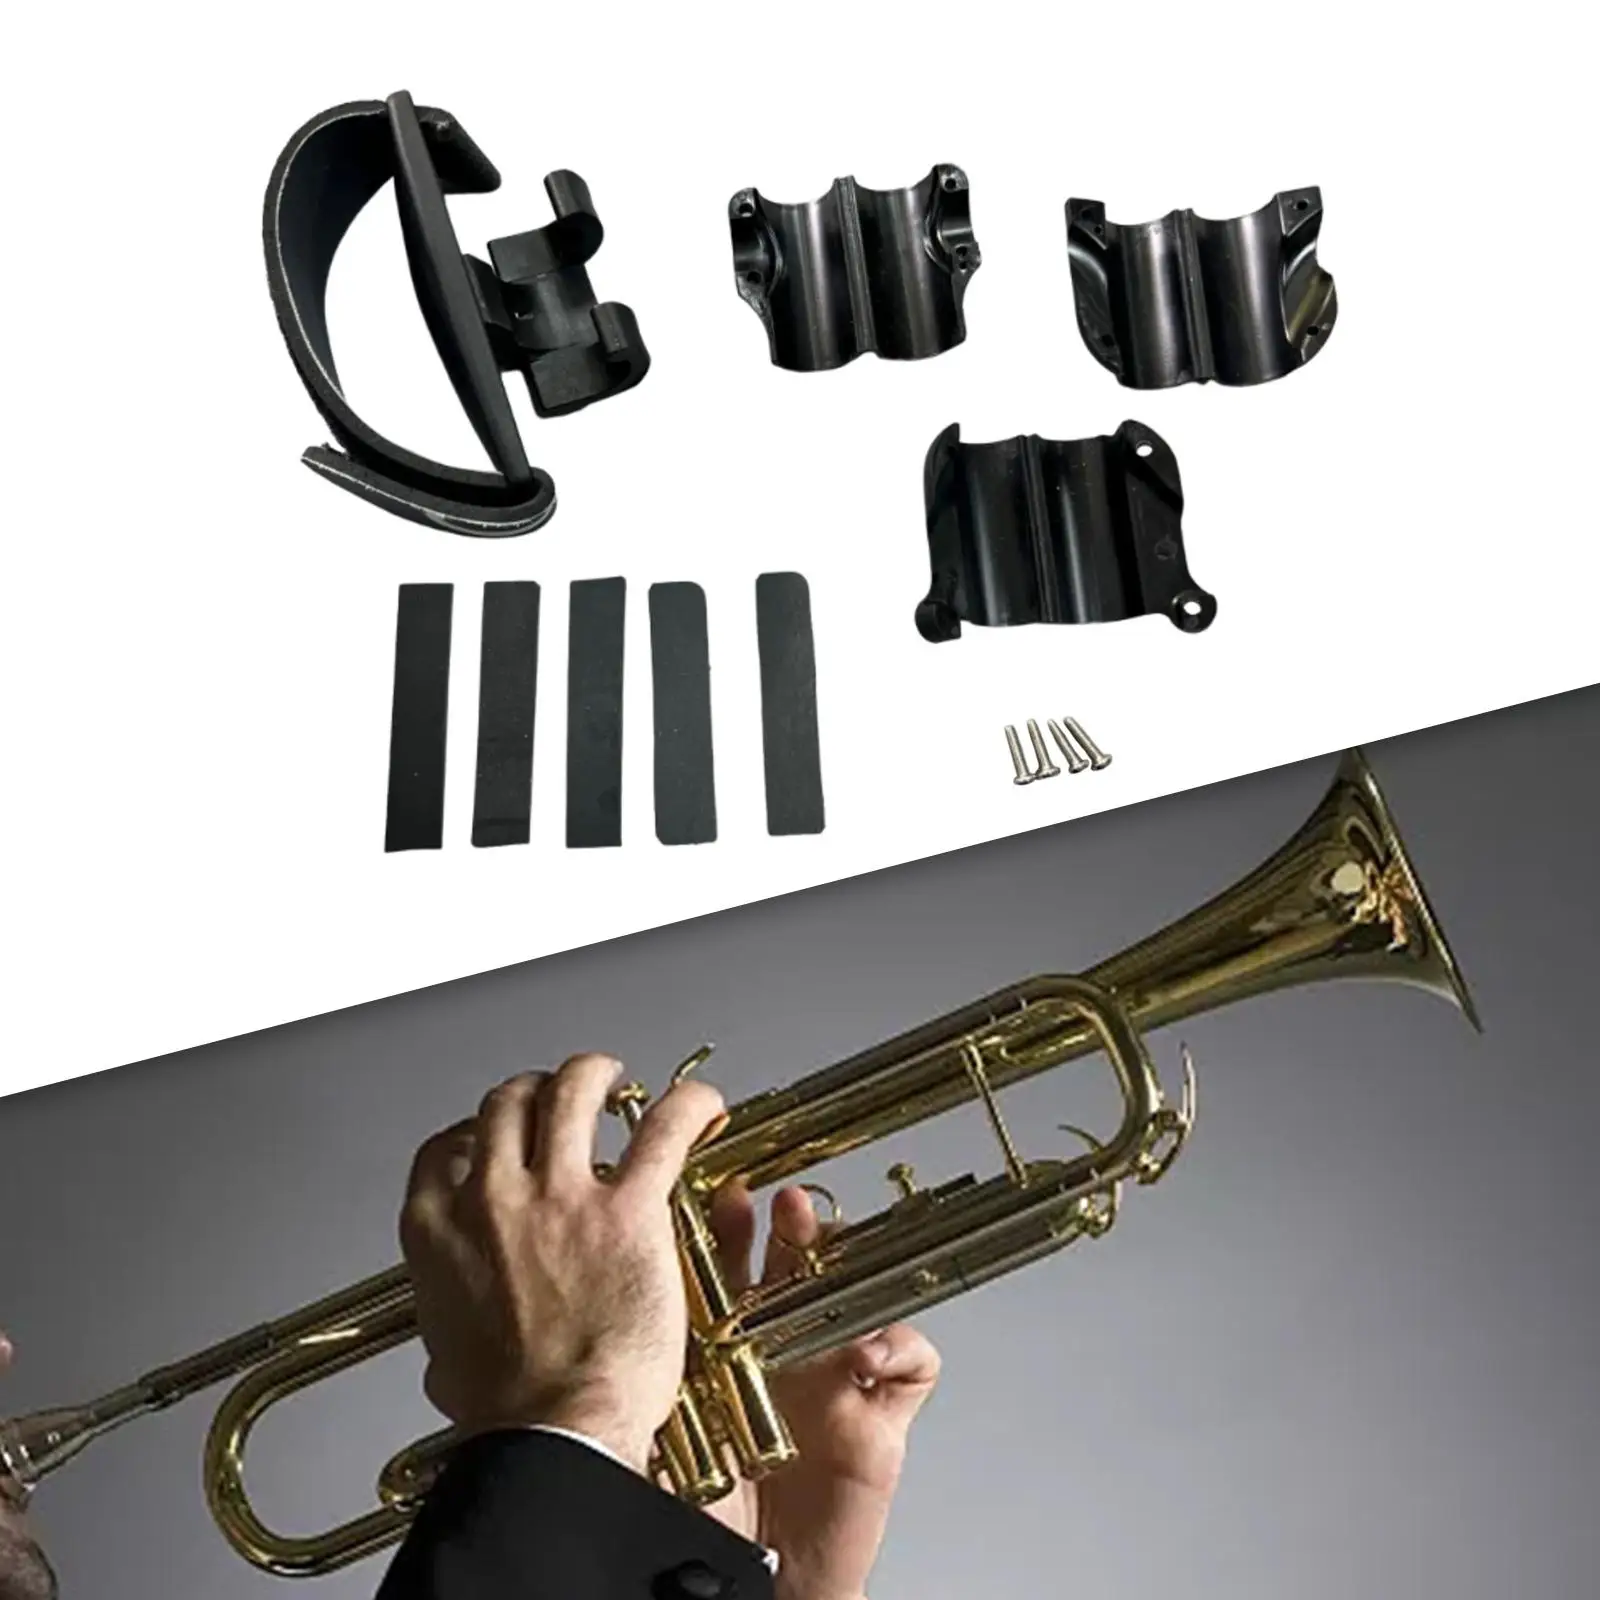 Trombone Grip Musician Gifts Can Balance The Instrument Adjustable Attachments Cleaning Care Accessories with Screws and Straps